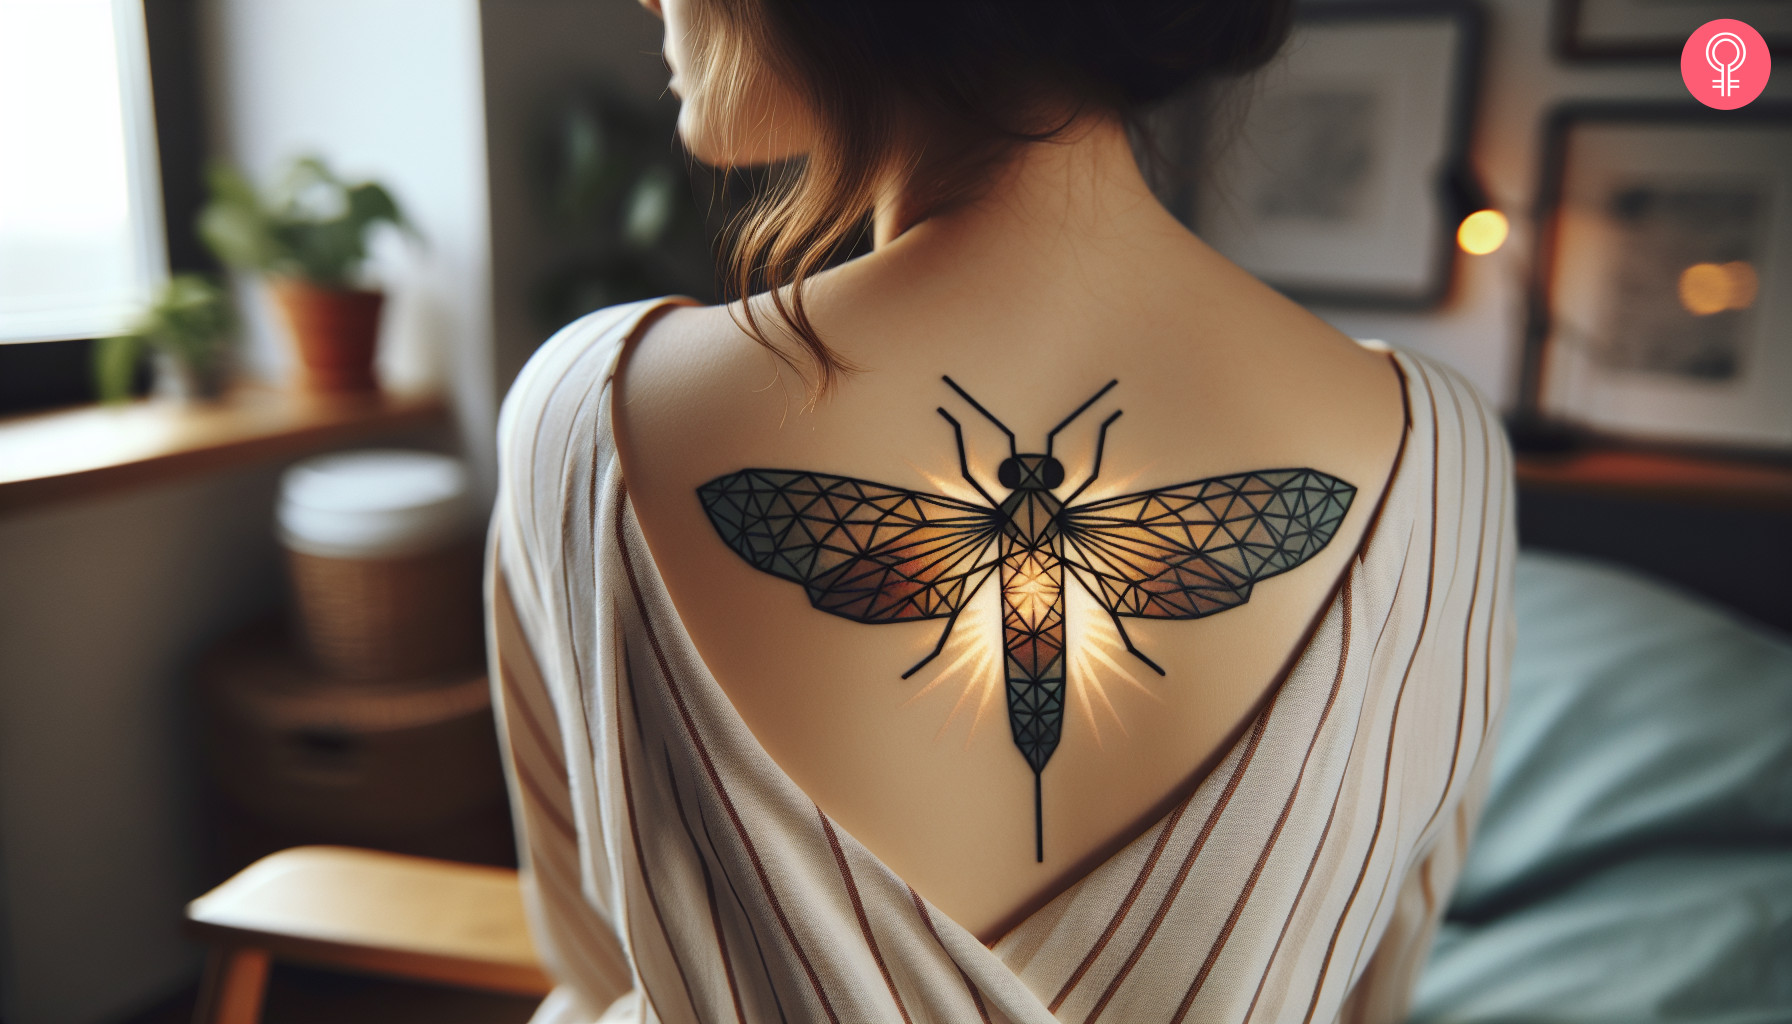 Woman with geometric firefly tattoo on her upper back